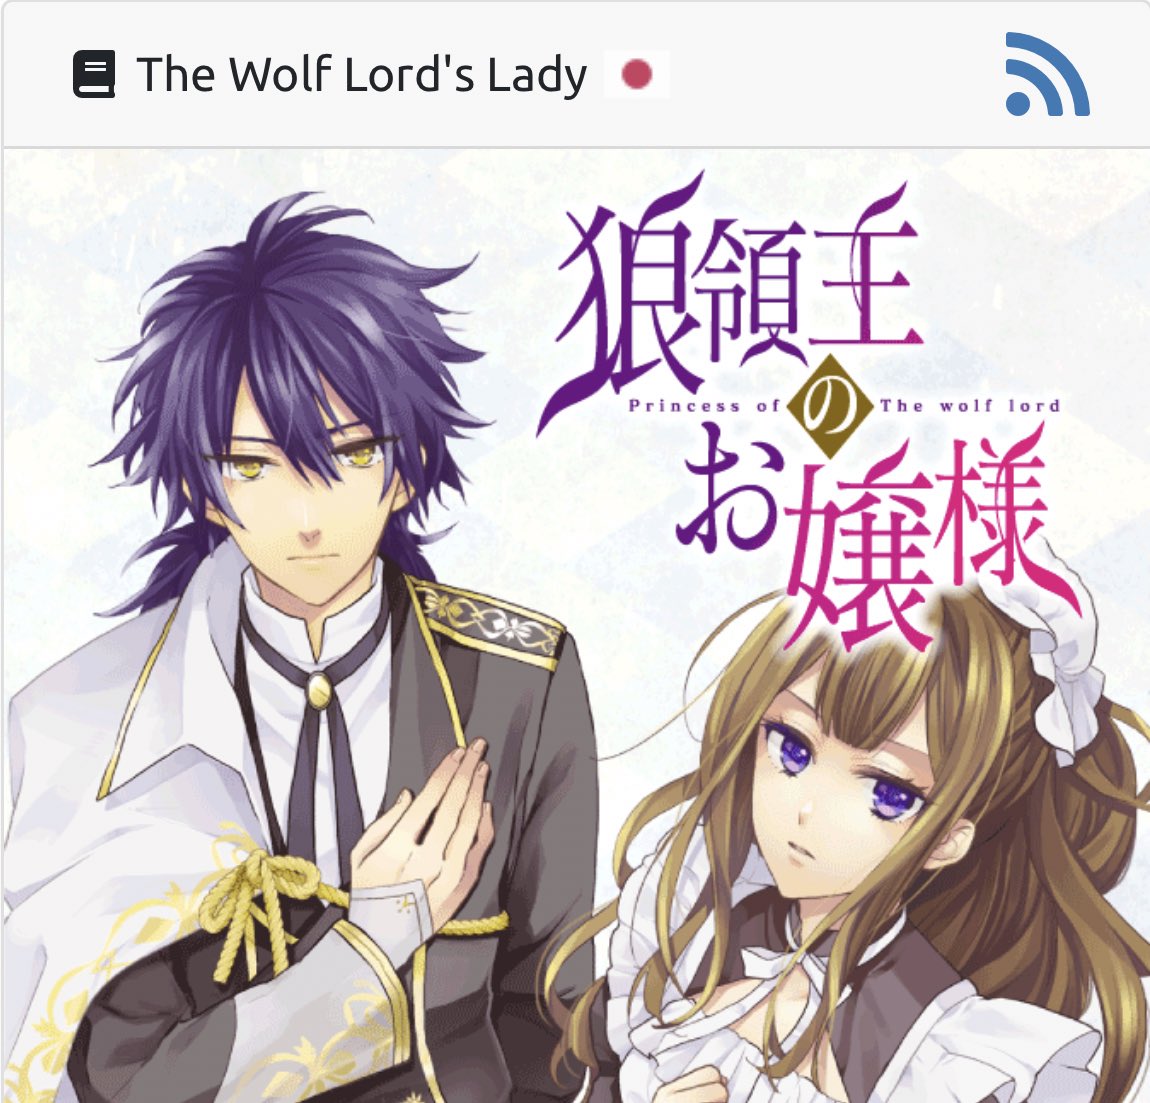 He disguised himself as a butler, infiltrated into her noble mansion and during that time became her lover, only to cause the execution of her entire family. Reborn again as a commoner. Cruel fate led her back, to become a maidservant to him, whom people now called a wolf lord.